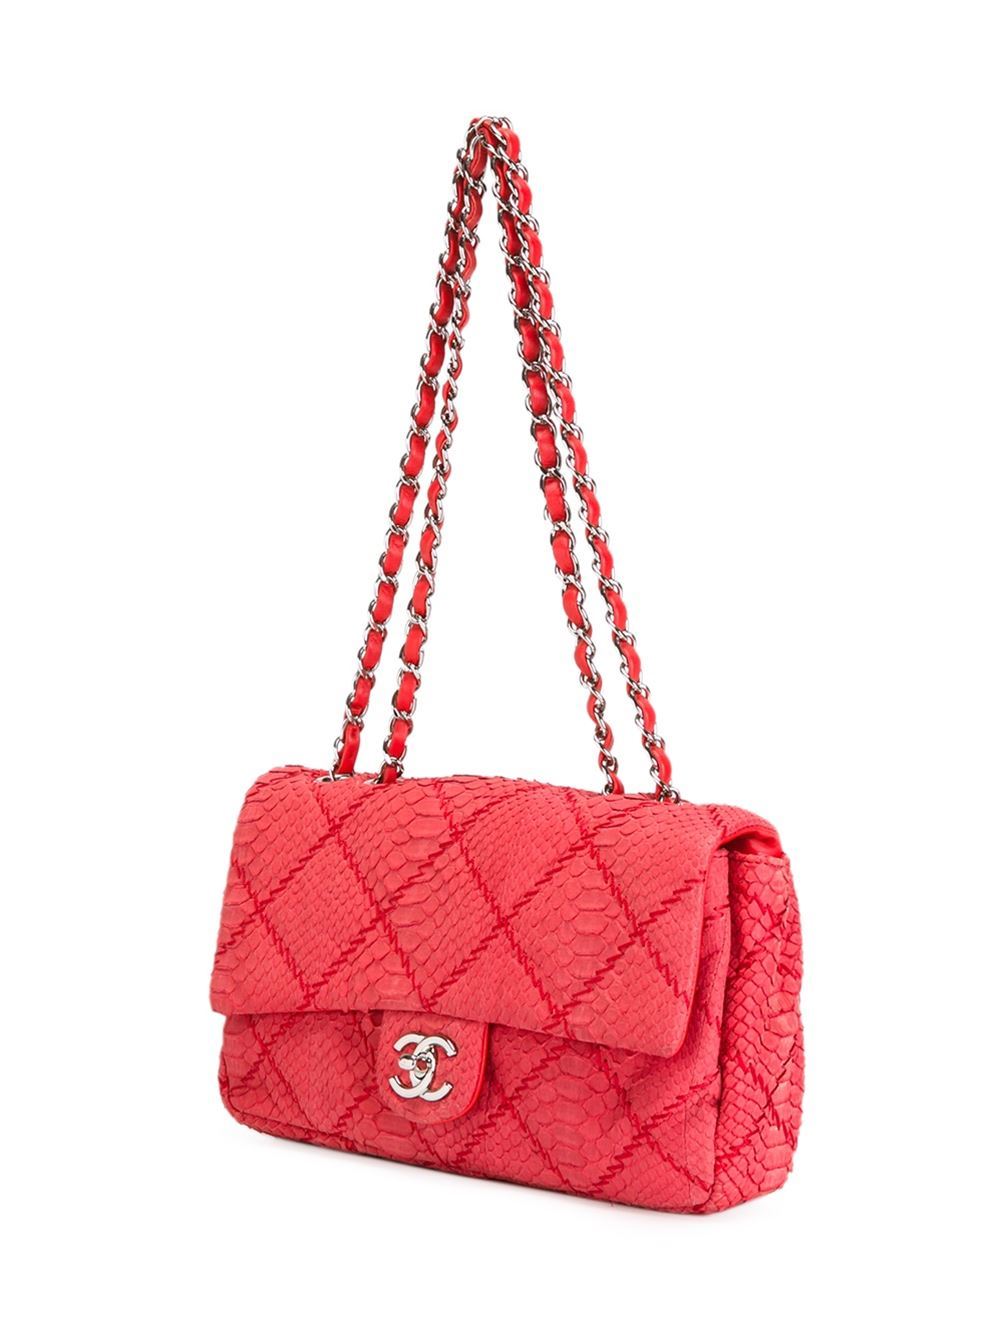 This red python skin flap shoulder bag from Chanel features a fold-over top with twist-lock closure, a silver-tone CC logo plaque, a quilted effect, a chain and leather strap, a back slip pocket, an internal zipped pocket, an internal slip pocket